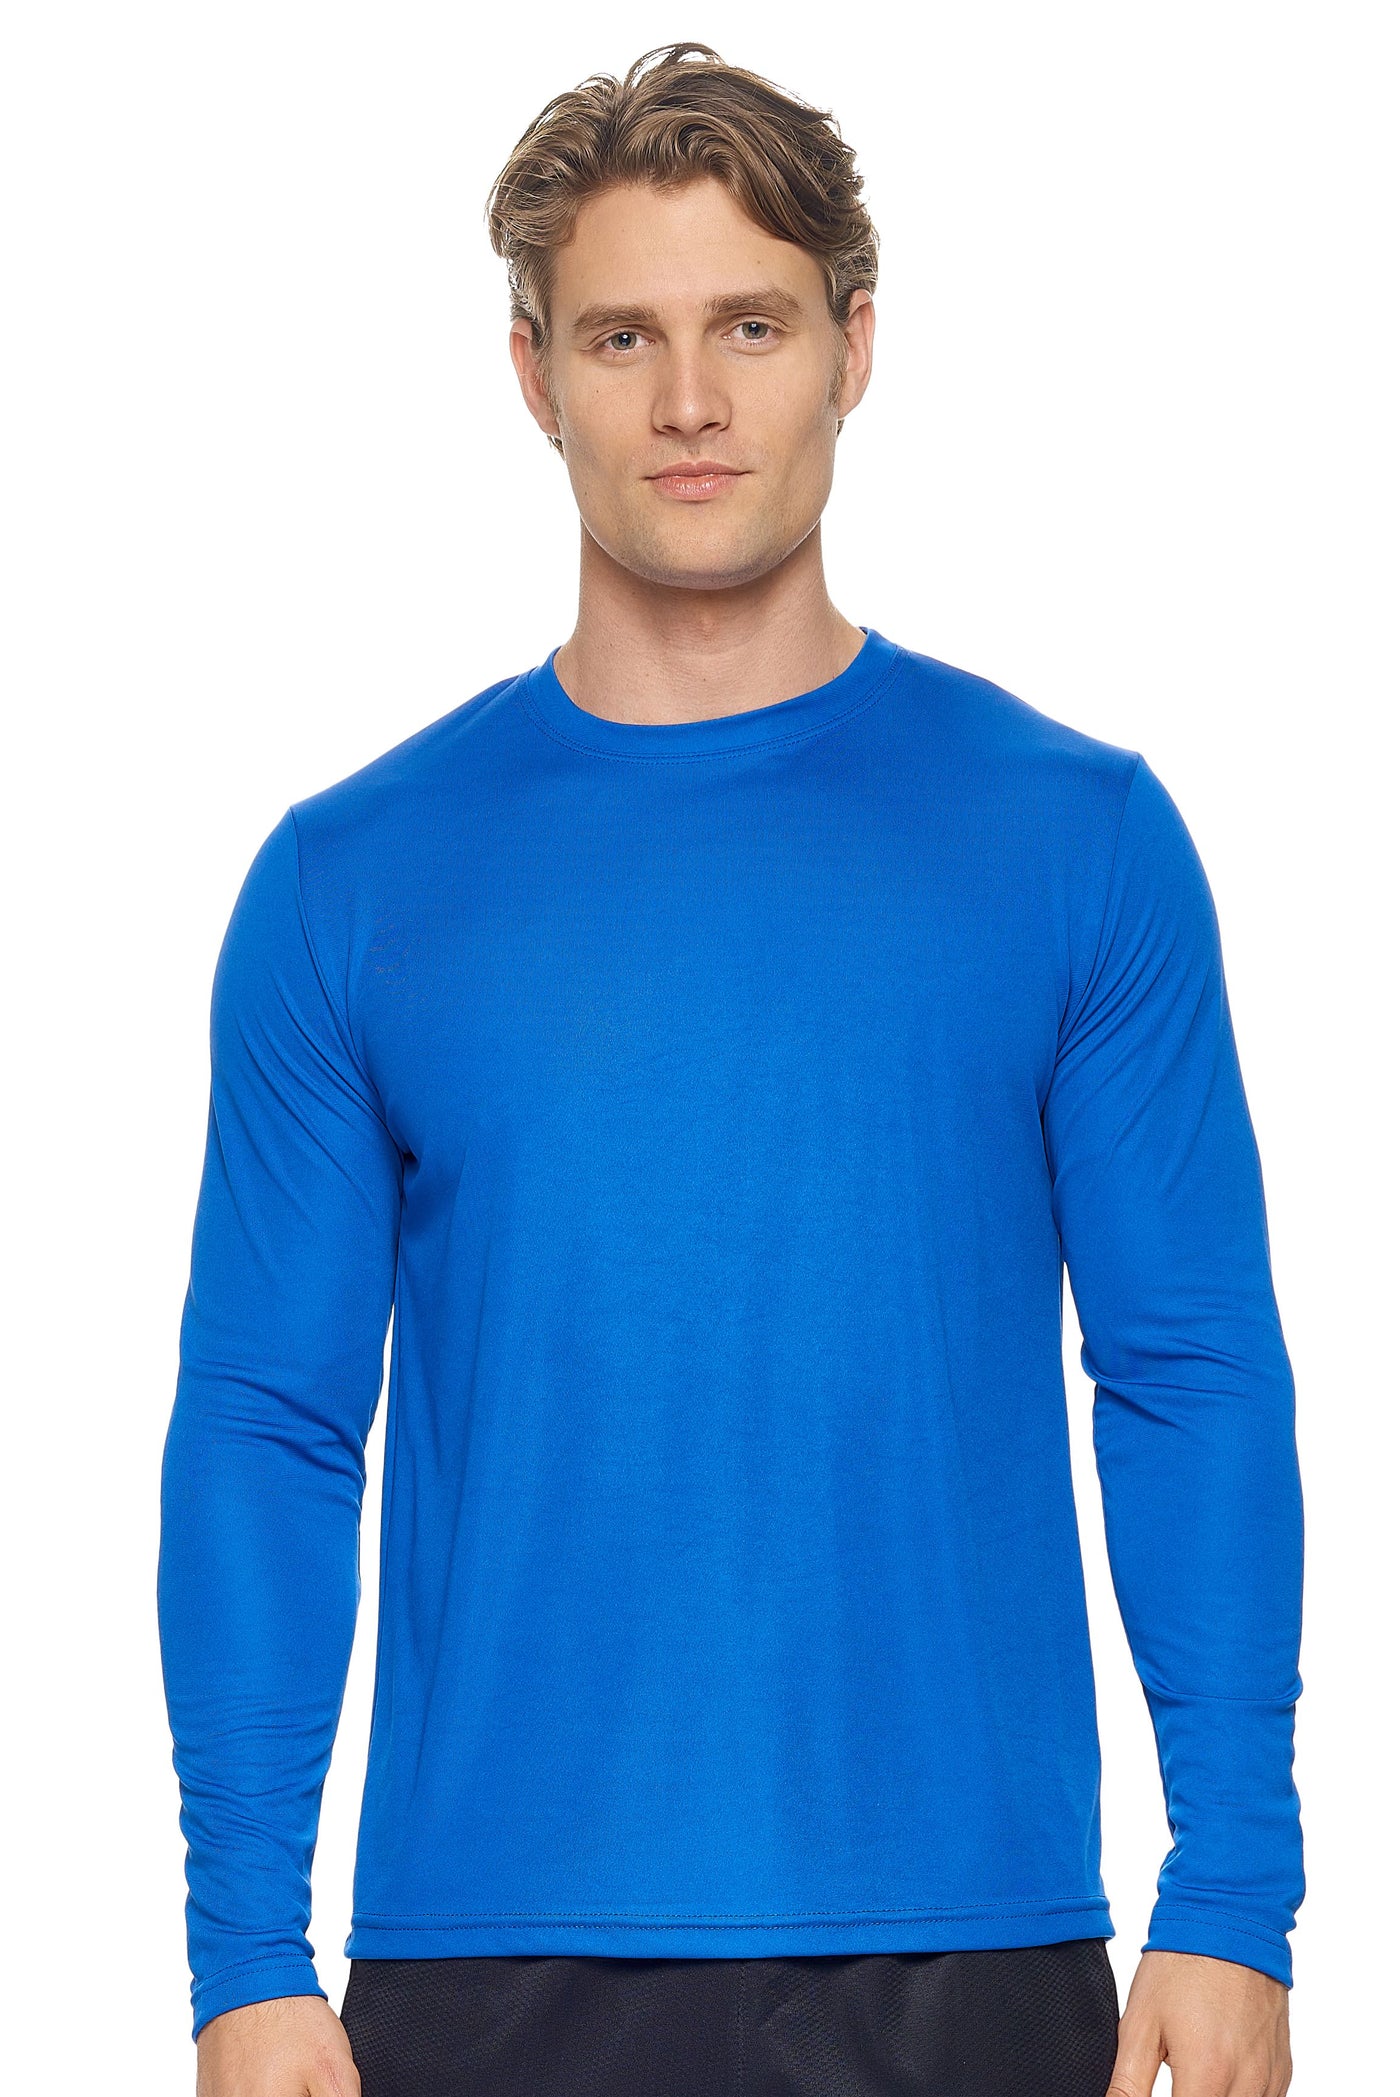 Expert Brand Retail Activewear Men's Sportswear Performance Fitness Crewneck Long Sleeve Tec Shirt Made in USA in royal blue#color_royal-blue